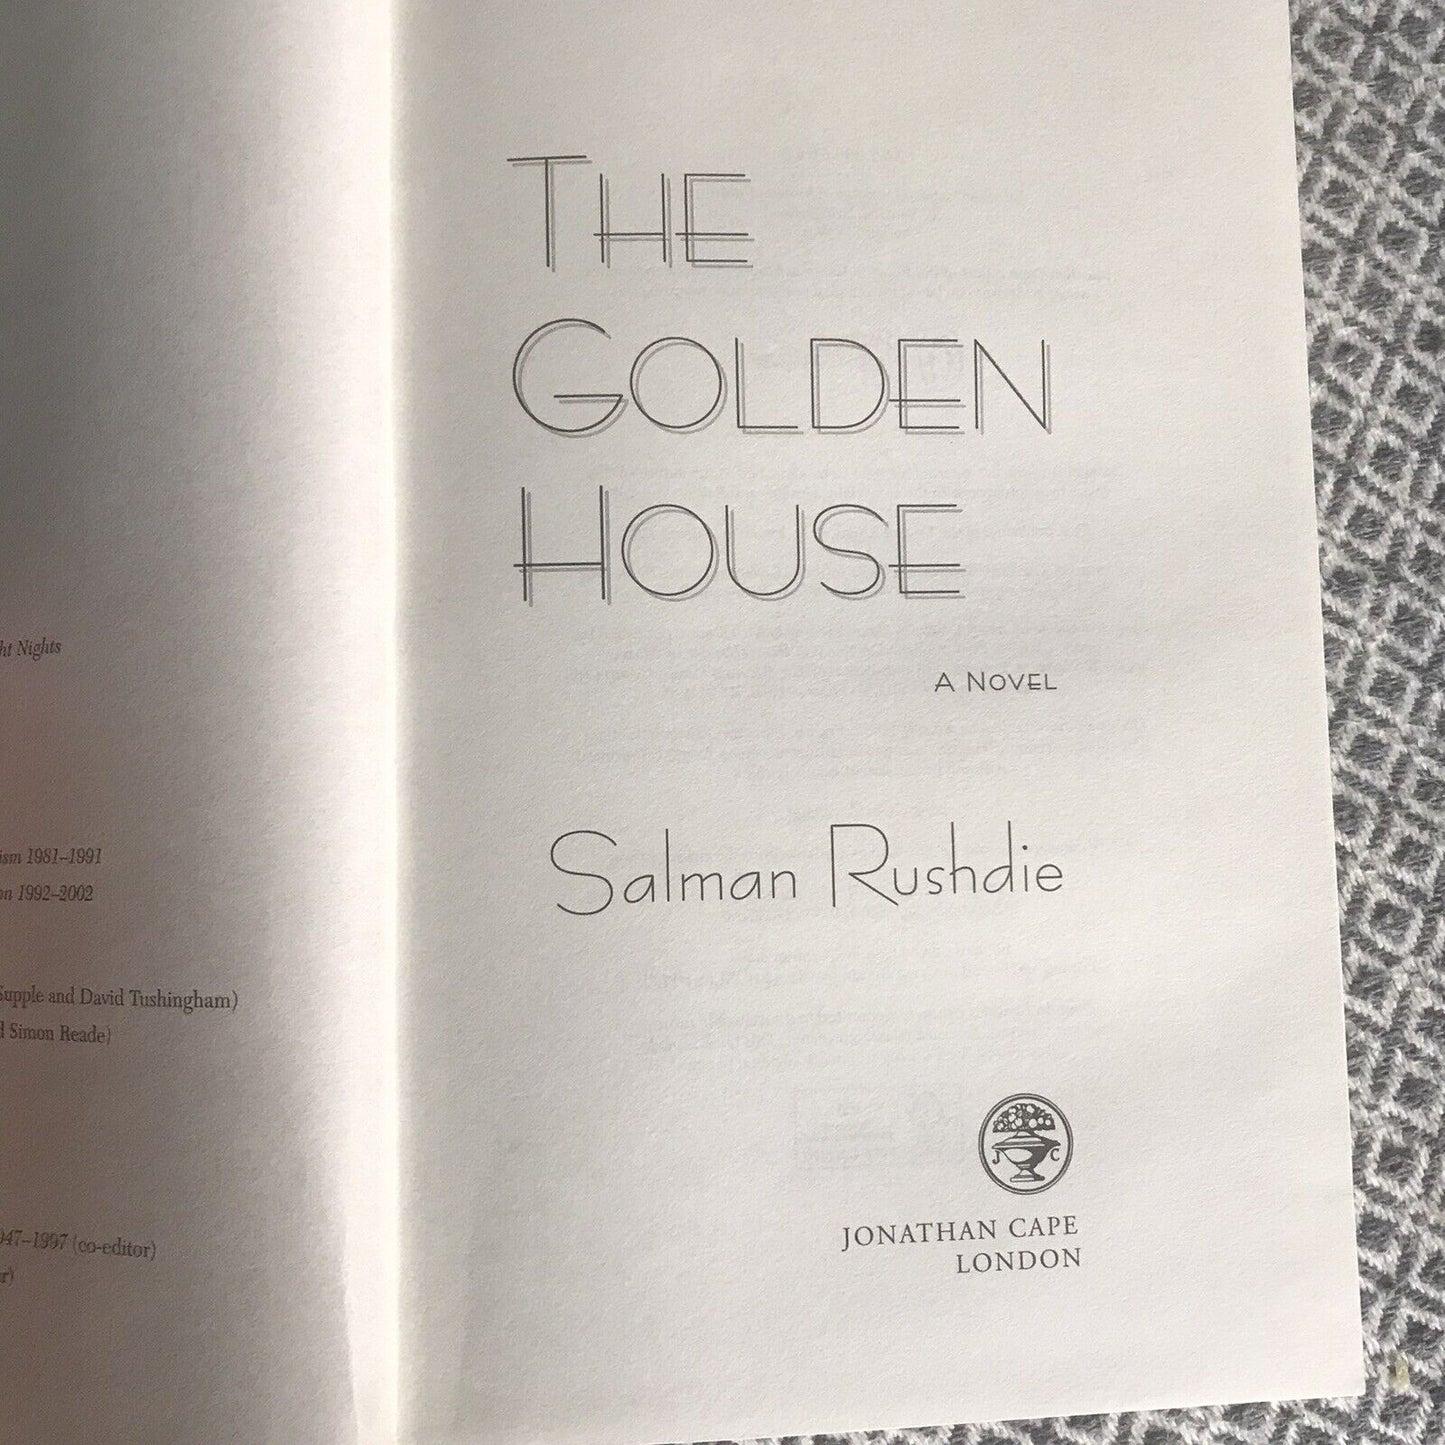 The Golden House by Salman Rushdie (Hardcover, 2017)